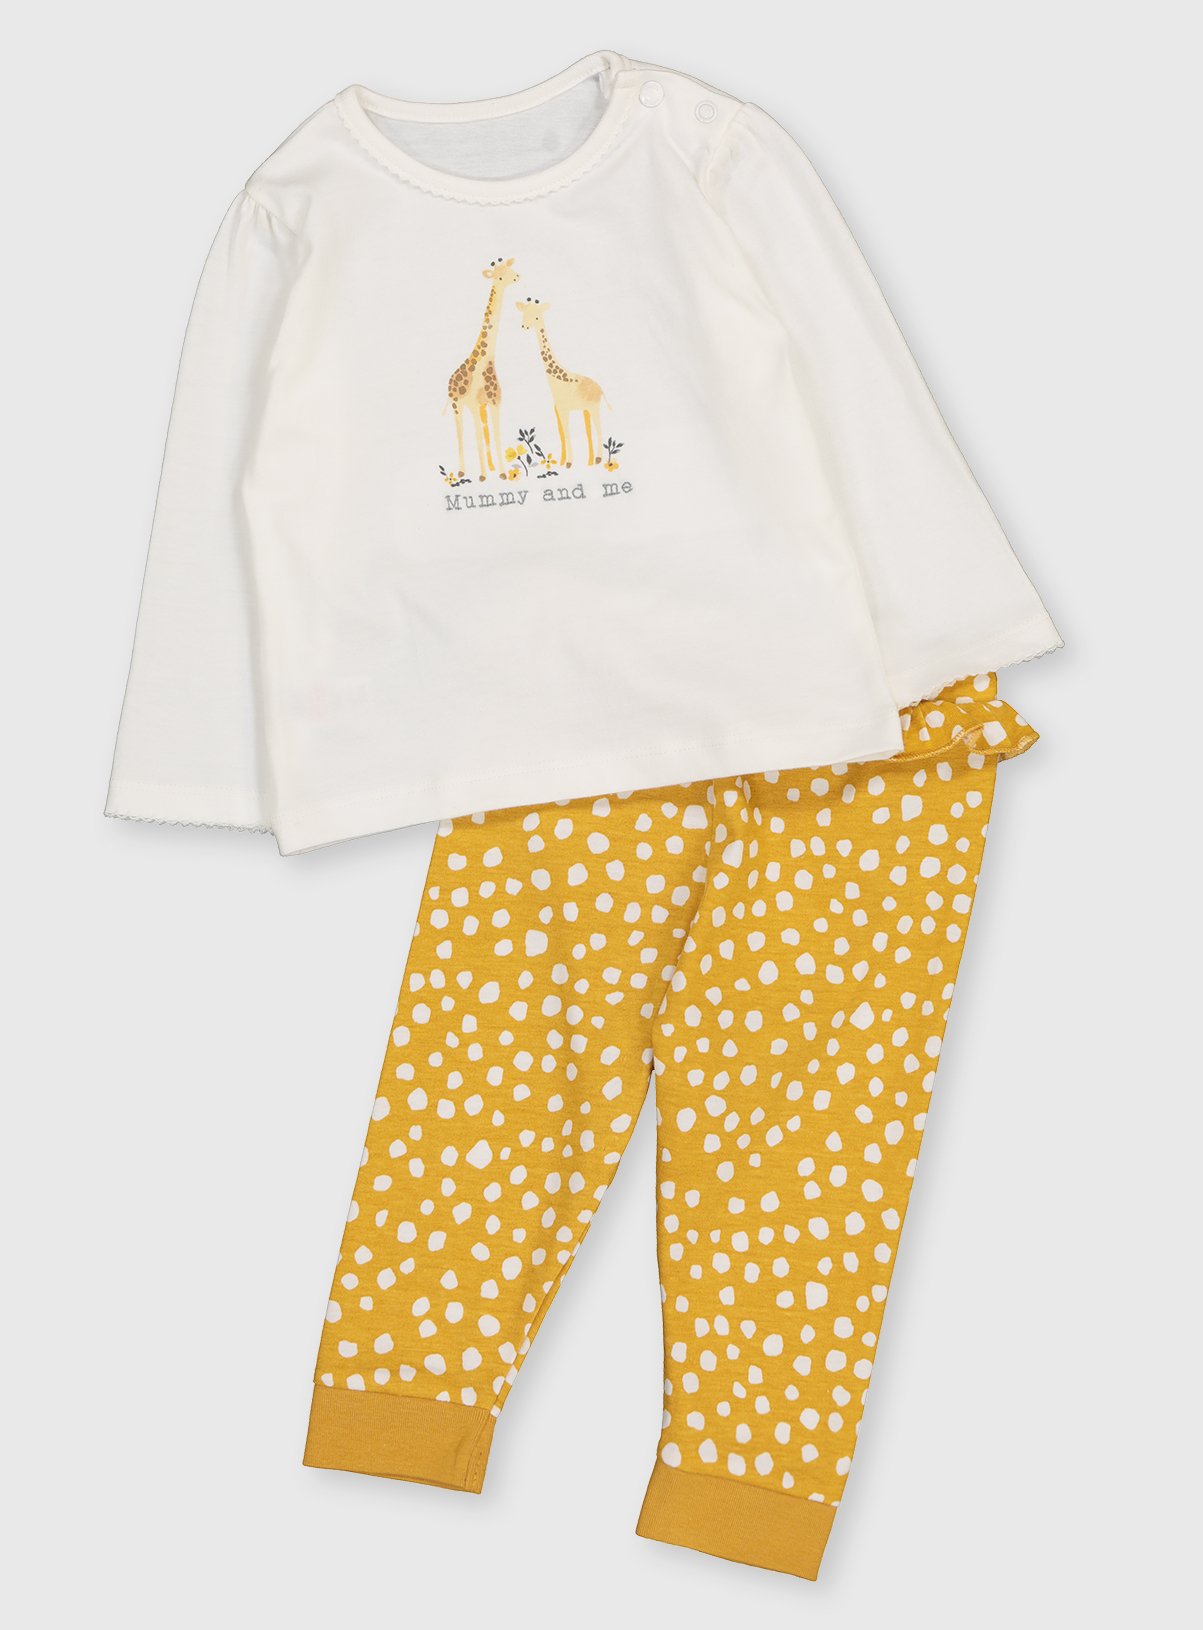 neutral baby sleepsuits